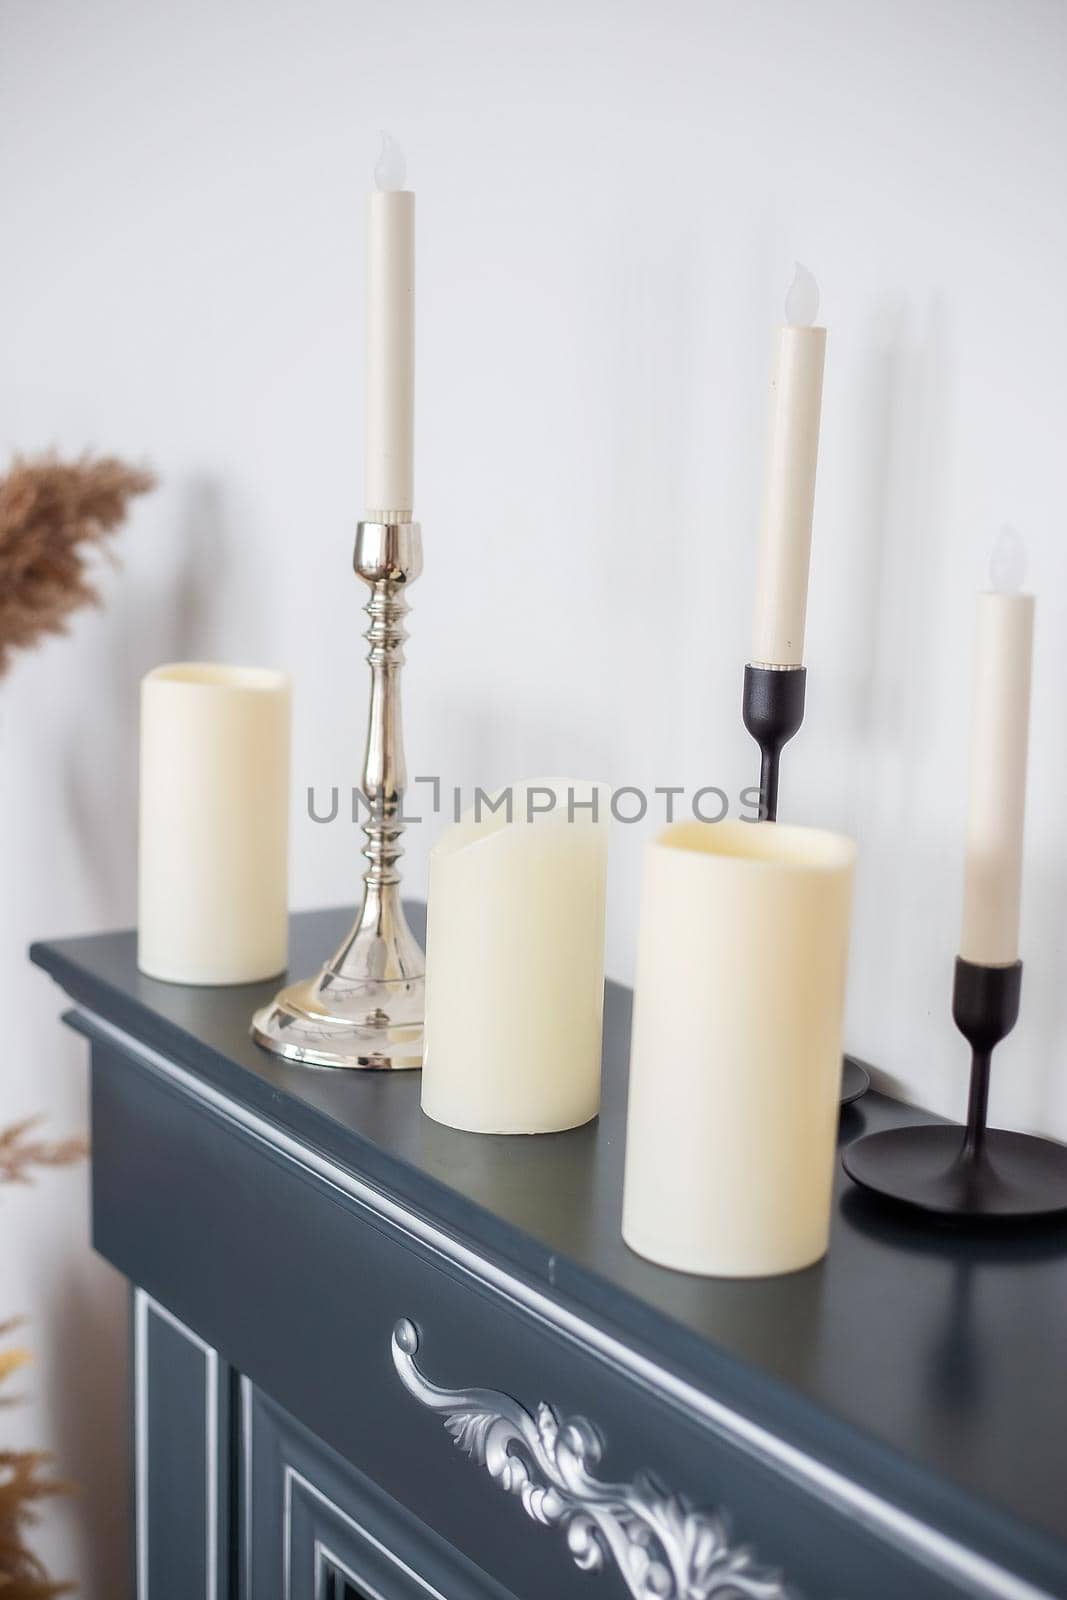 Candles of various types and sizes with and without candlesticks on the imitation fireplace countertop near the wall